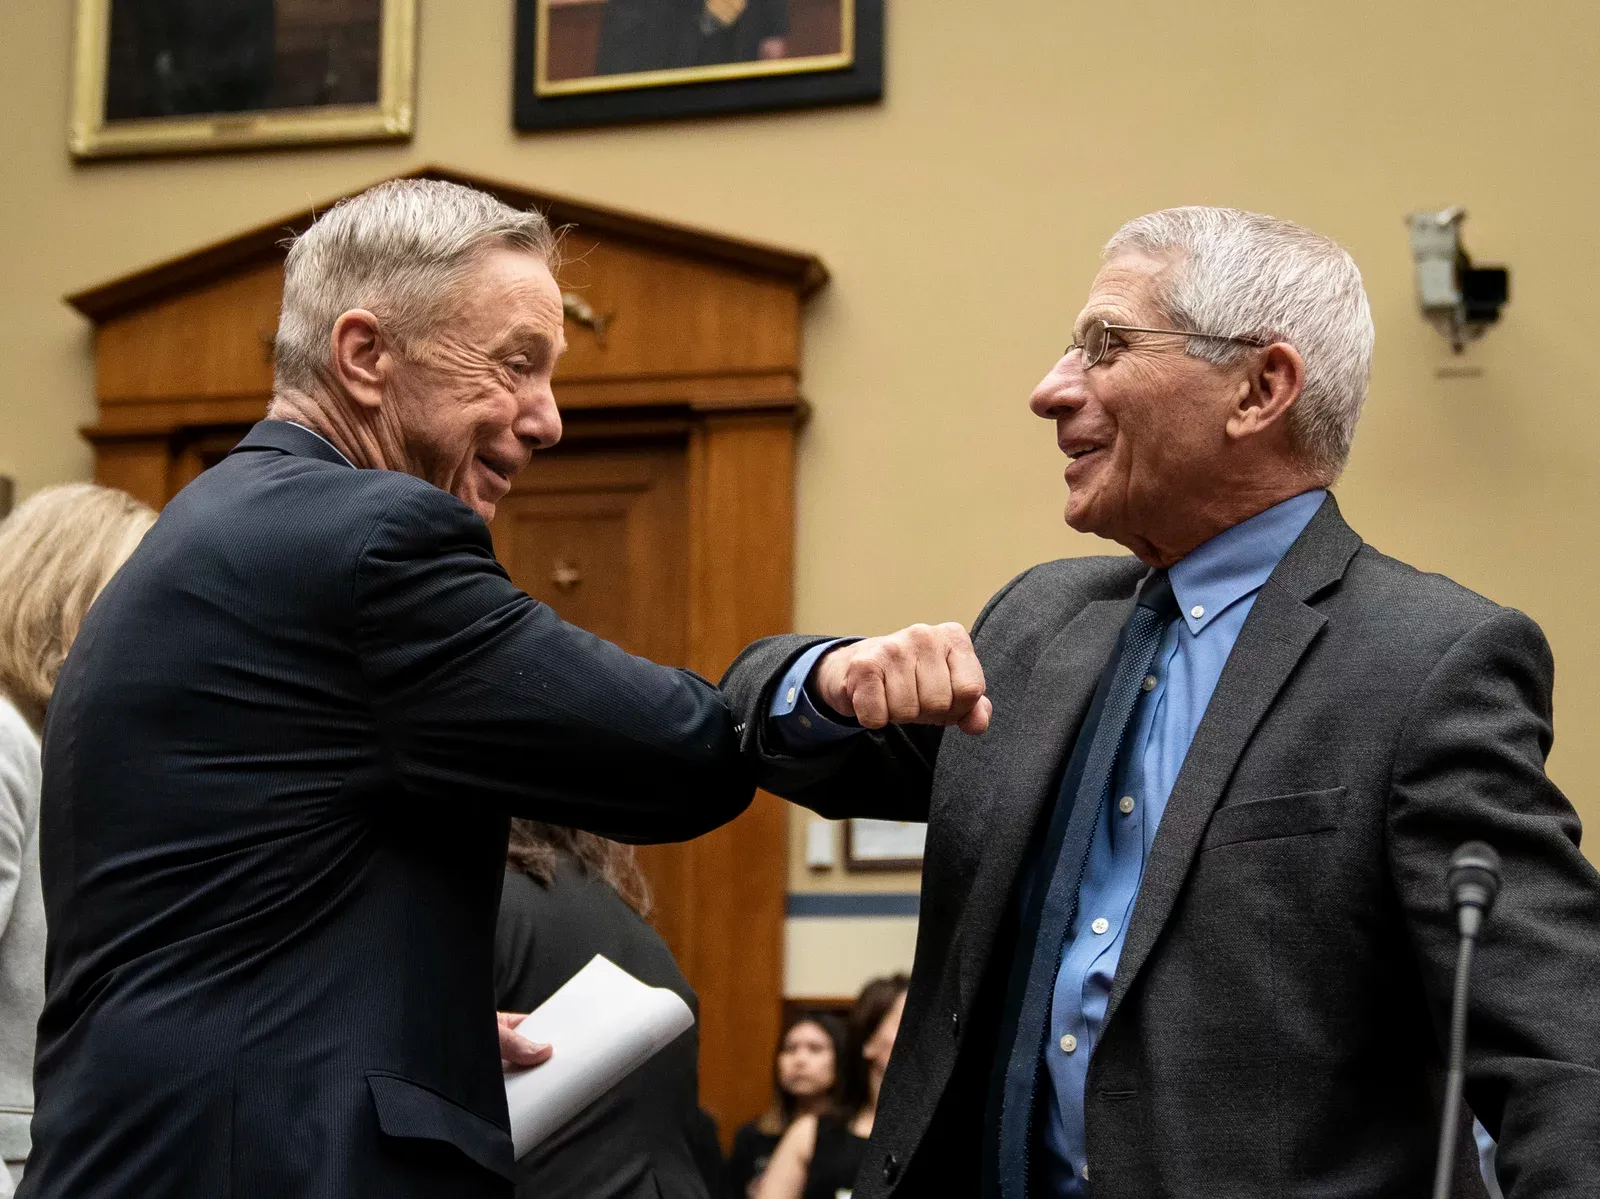 David Lynch D-Mass and Dr Anthony Fauci greeting each other March 11, 2020: Getty Images